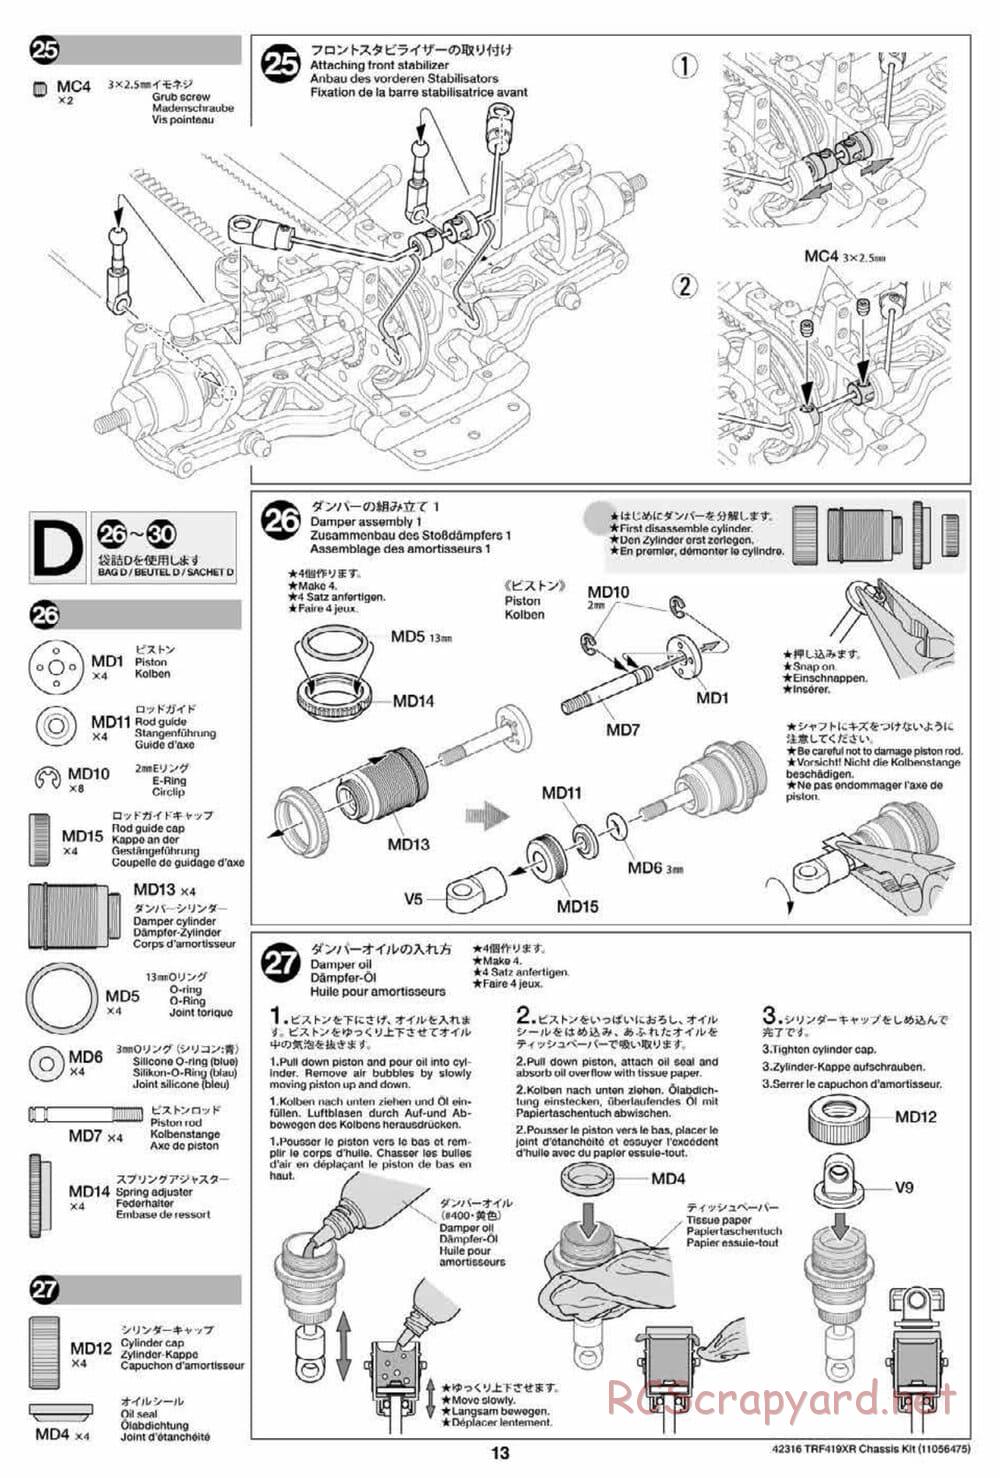 Tamiya - TRF419XR Chassis - Manual - Page 13